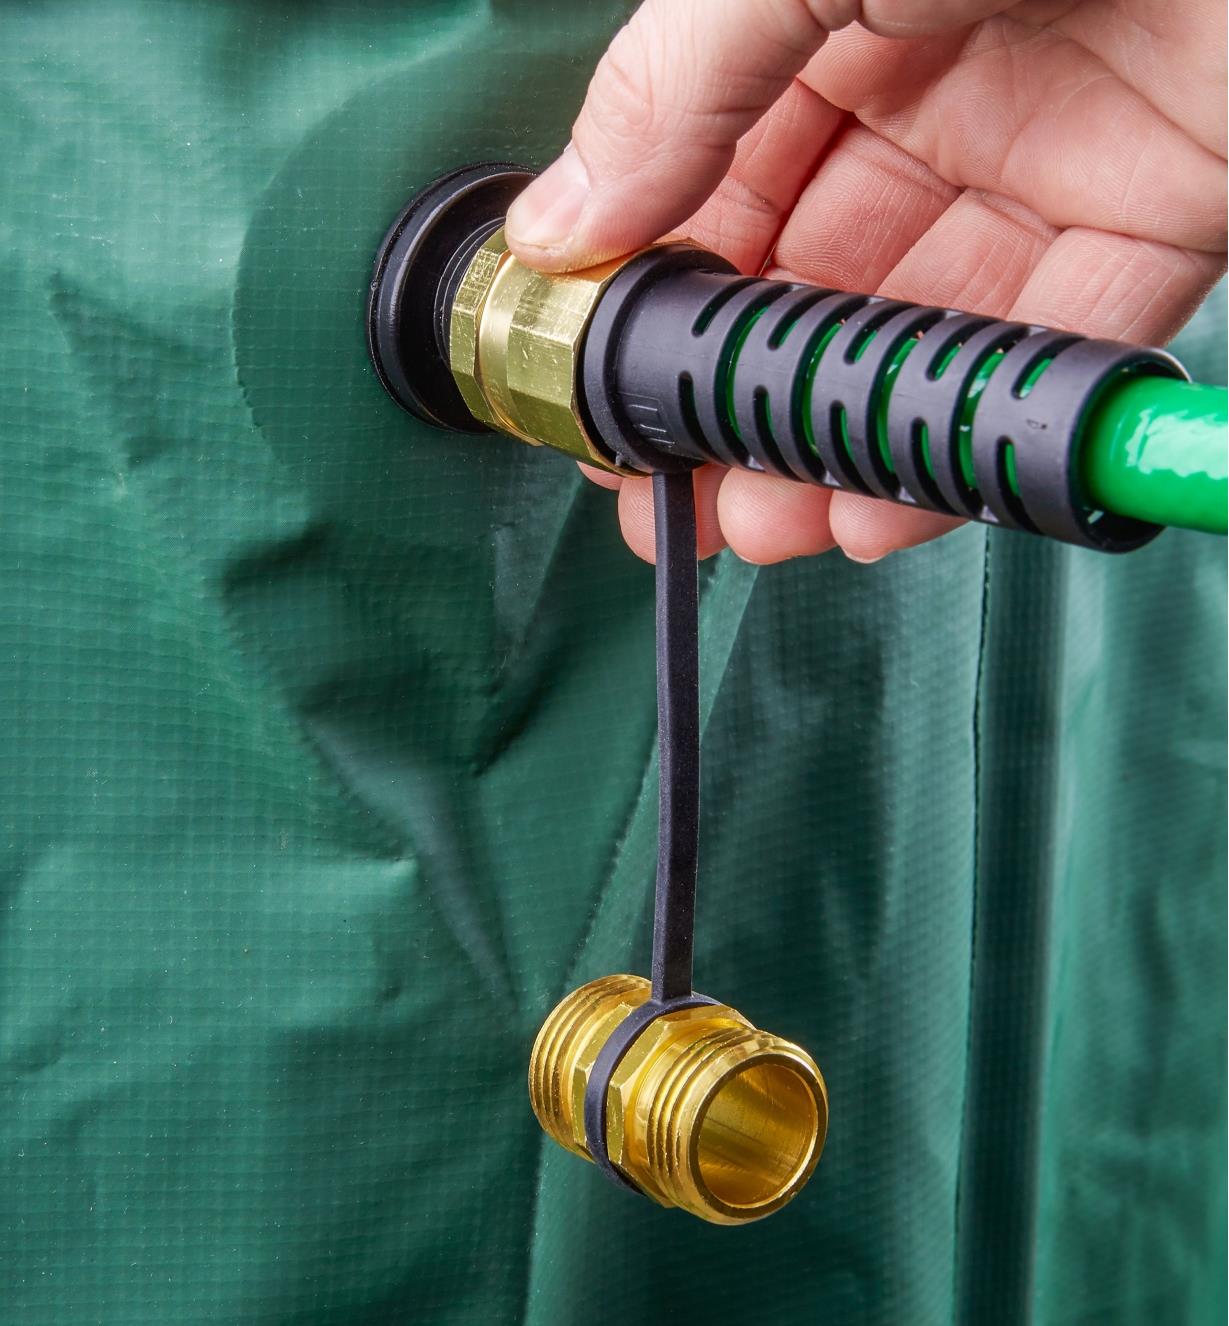 Attaching the universal leader hose to a rain barrel